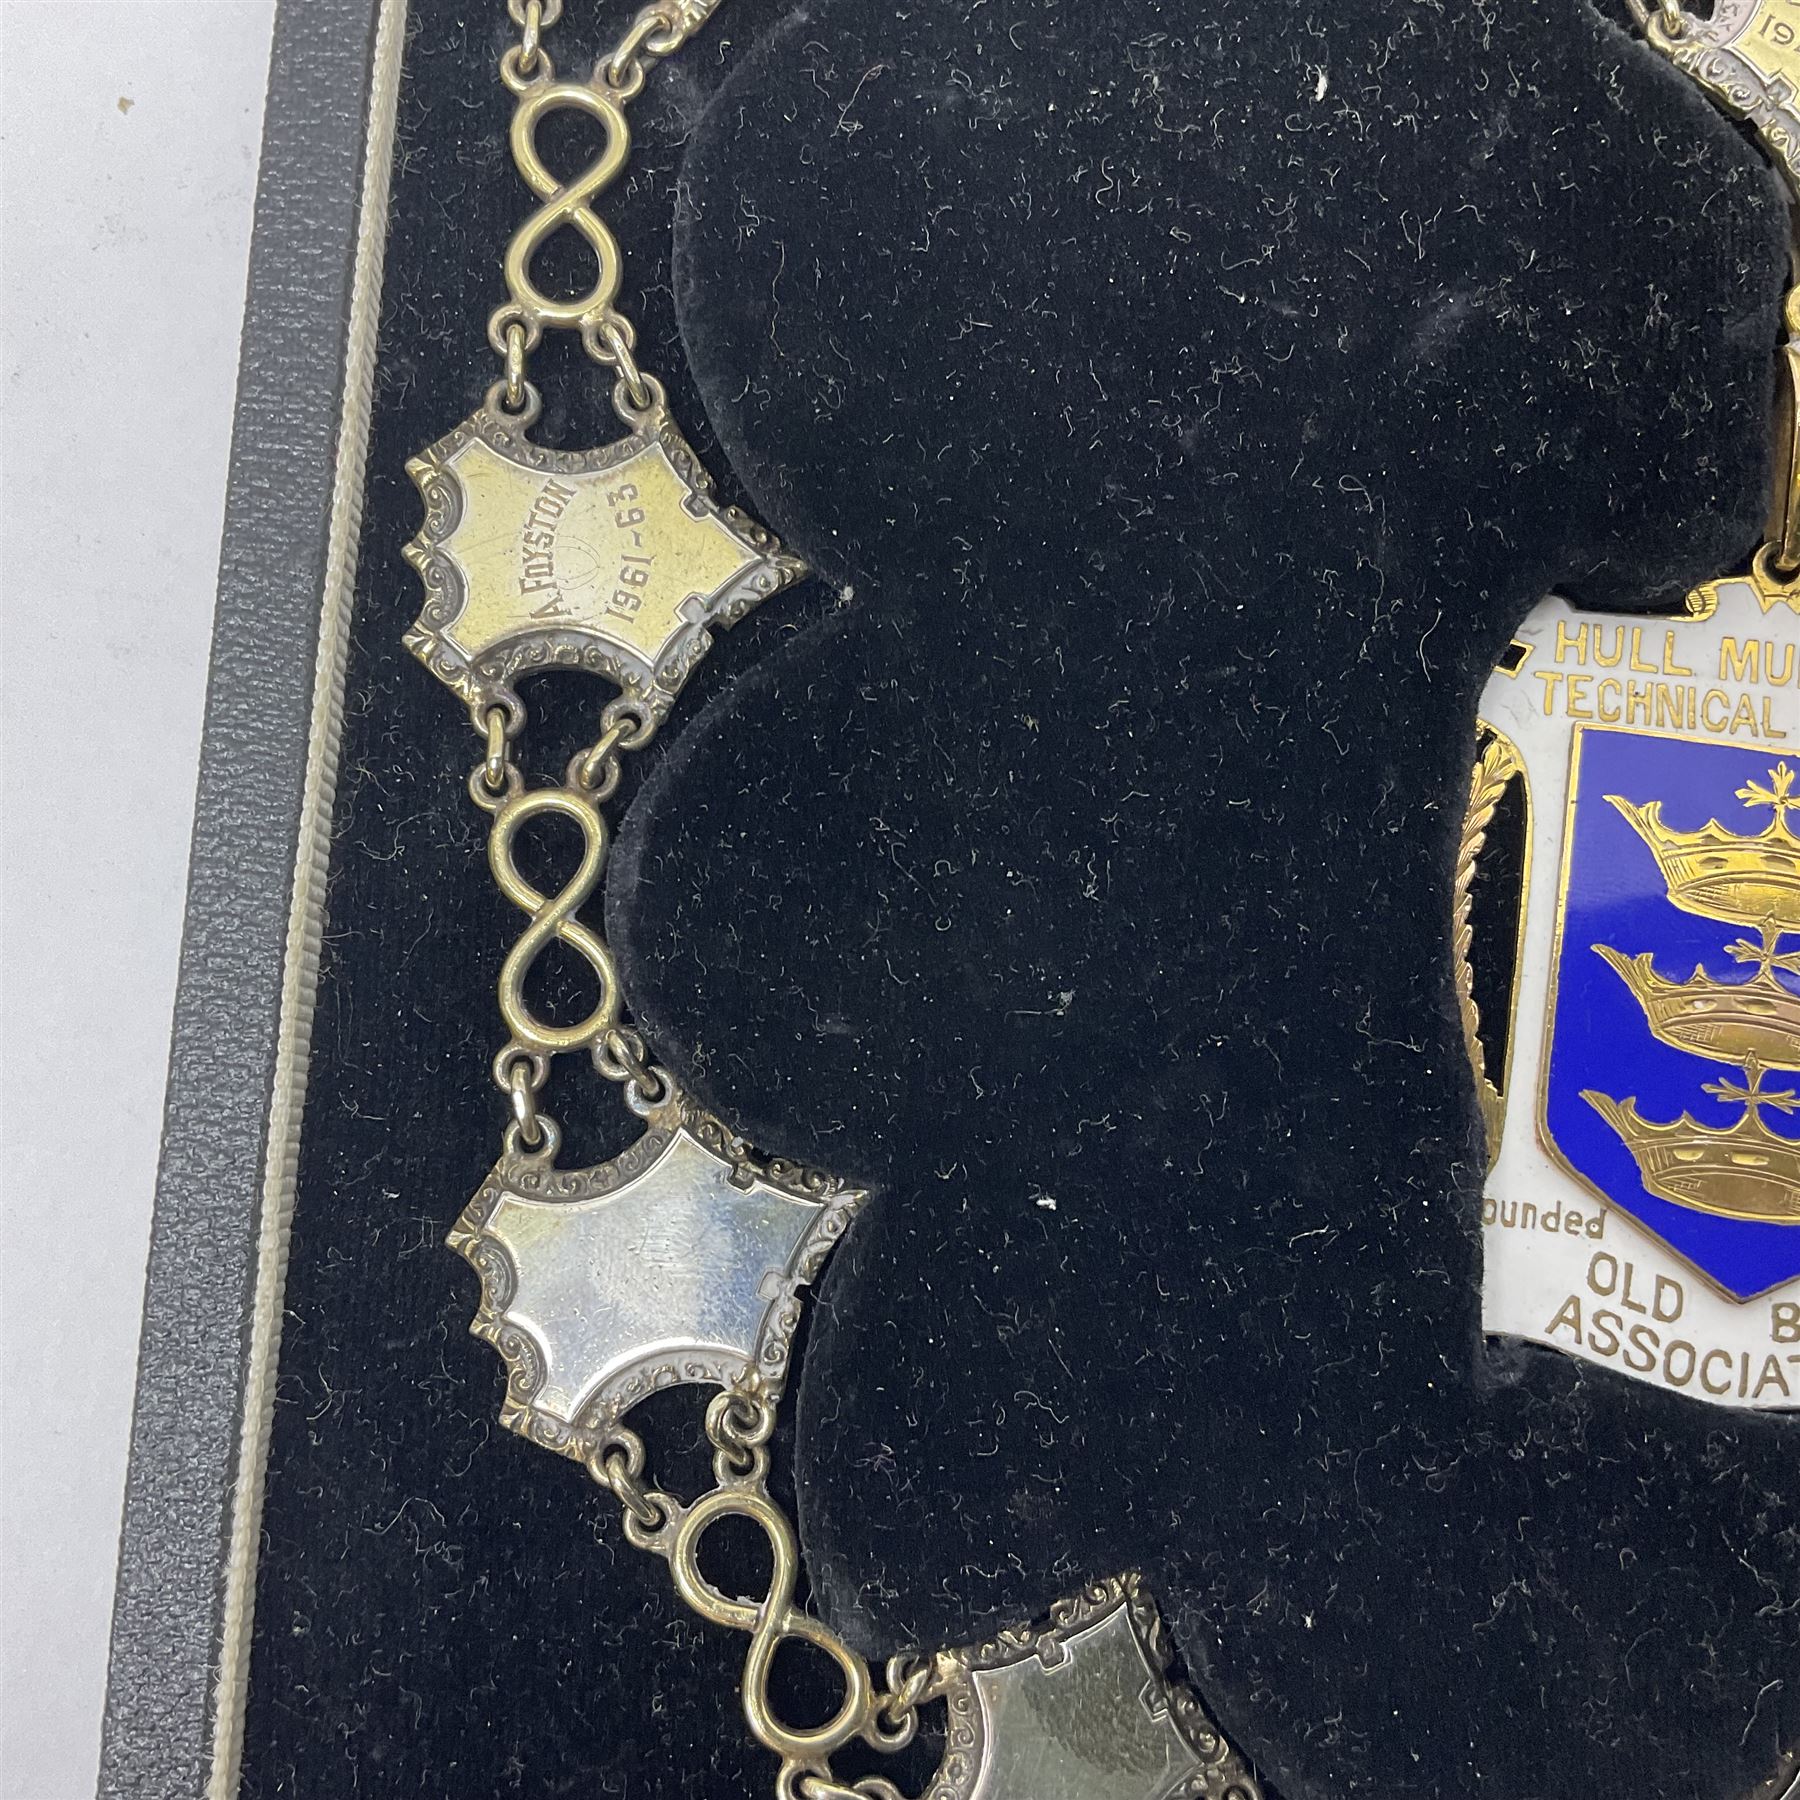 1920s 9ct gold enamel pendant inscribed 'Hull Municipal Technical College Old Boys Association' - Image 6 of 13